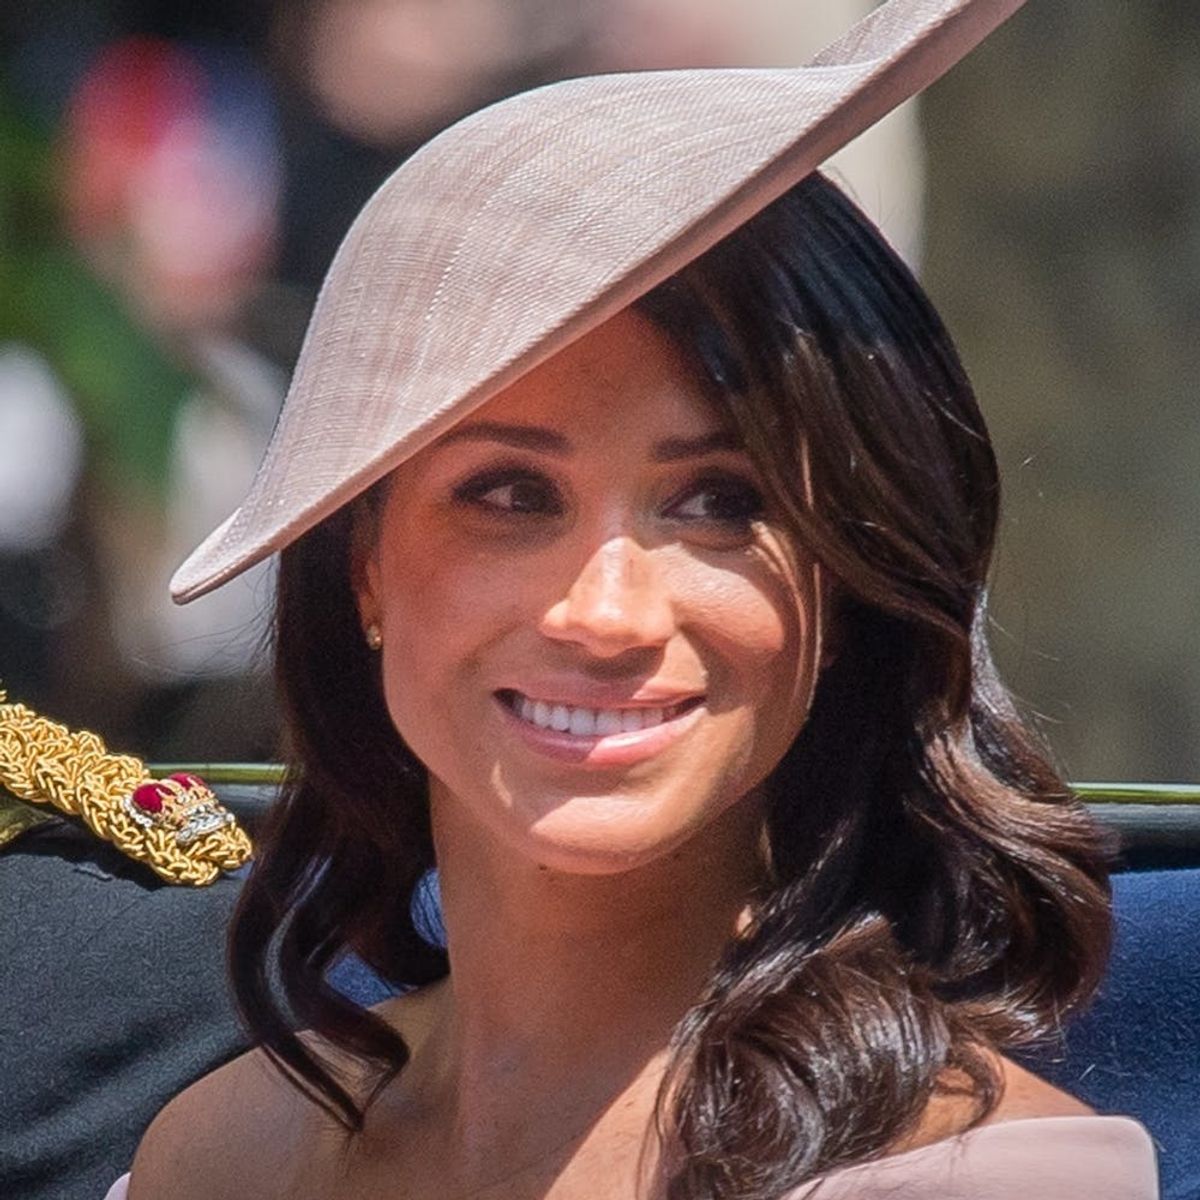 Meghan Markle Makes Her Trooping the Colour Debut in *This* Standout Style